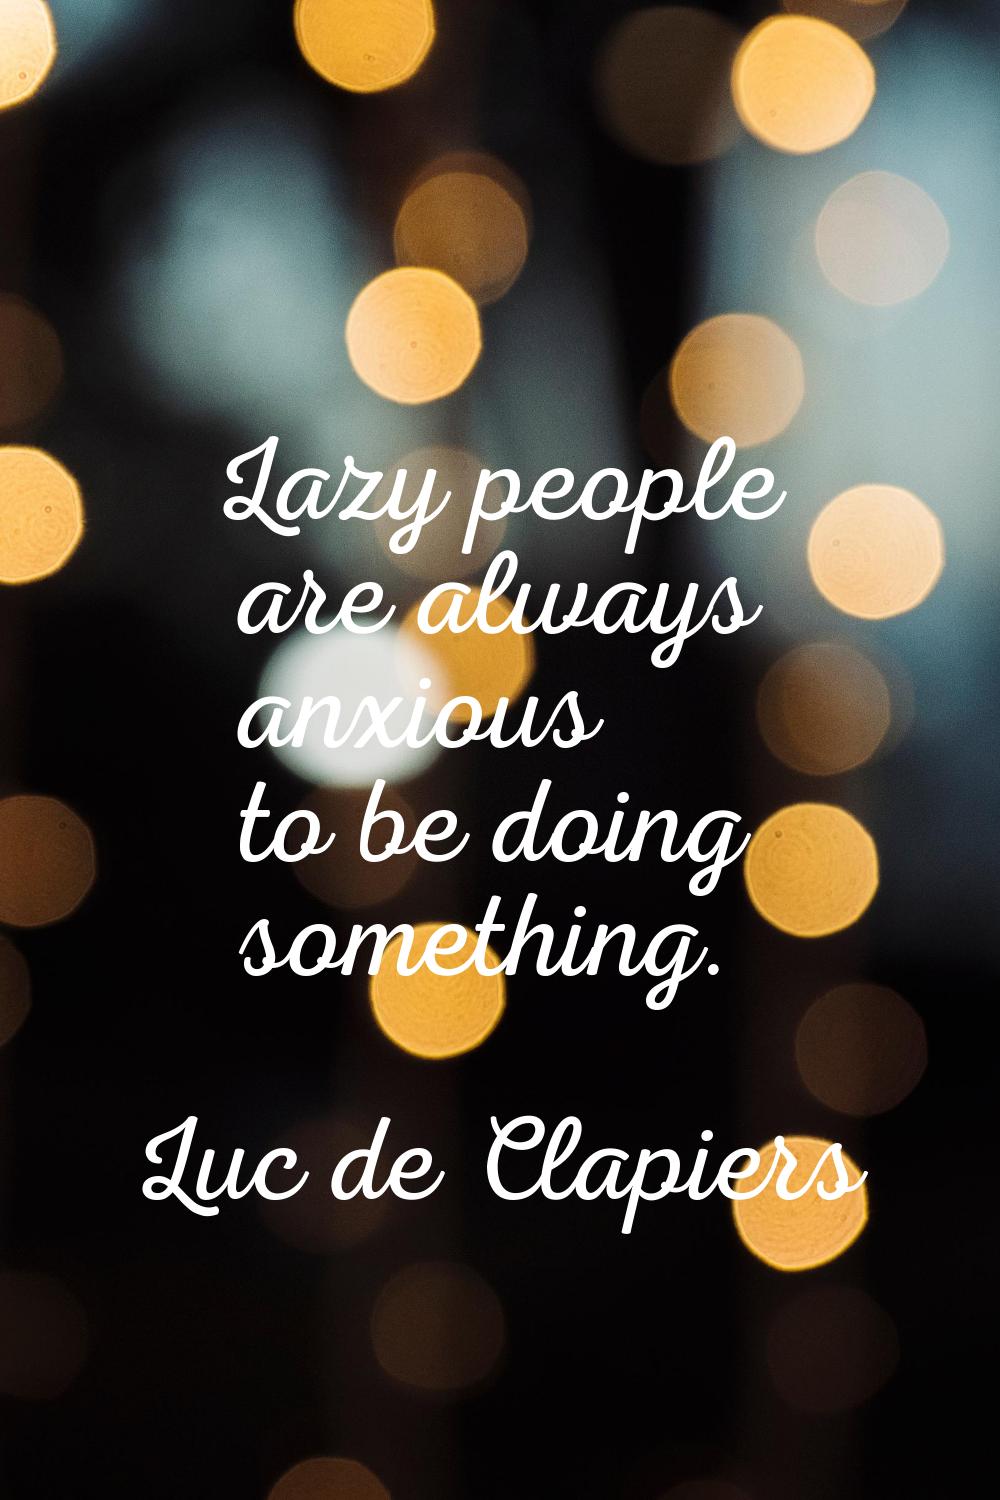 Lazy people are always anxious to be doing something.